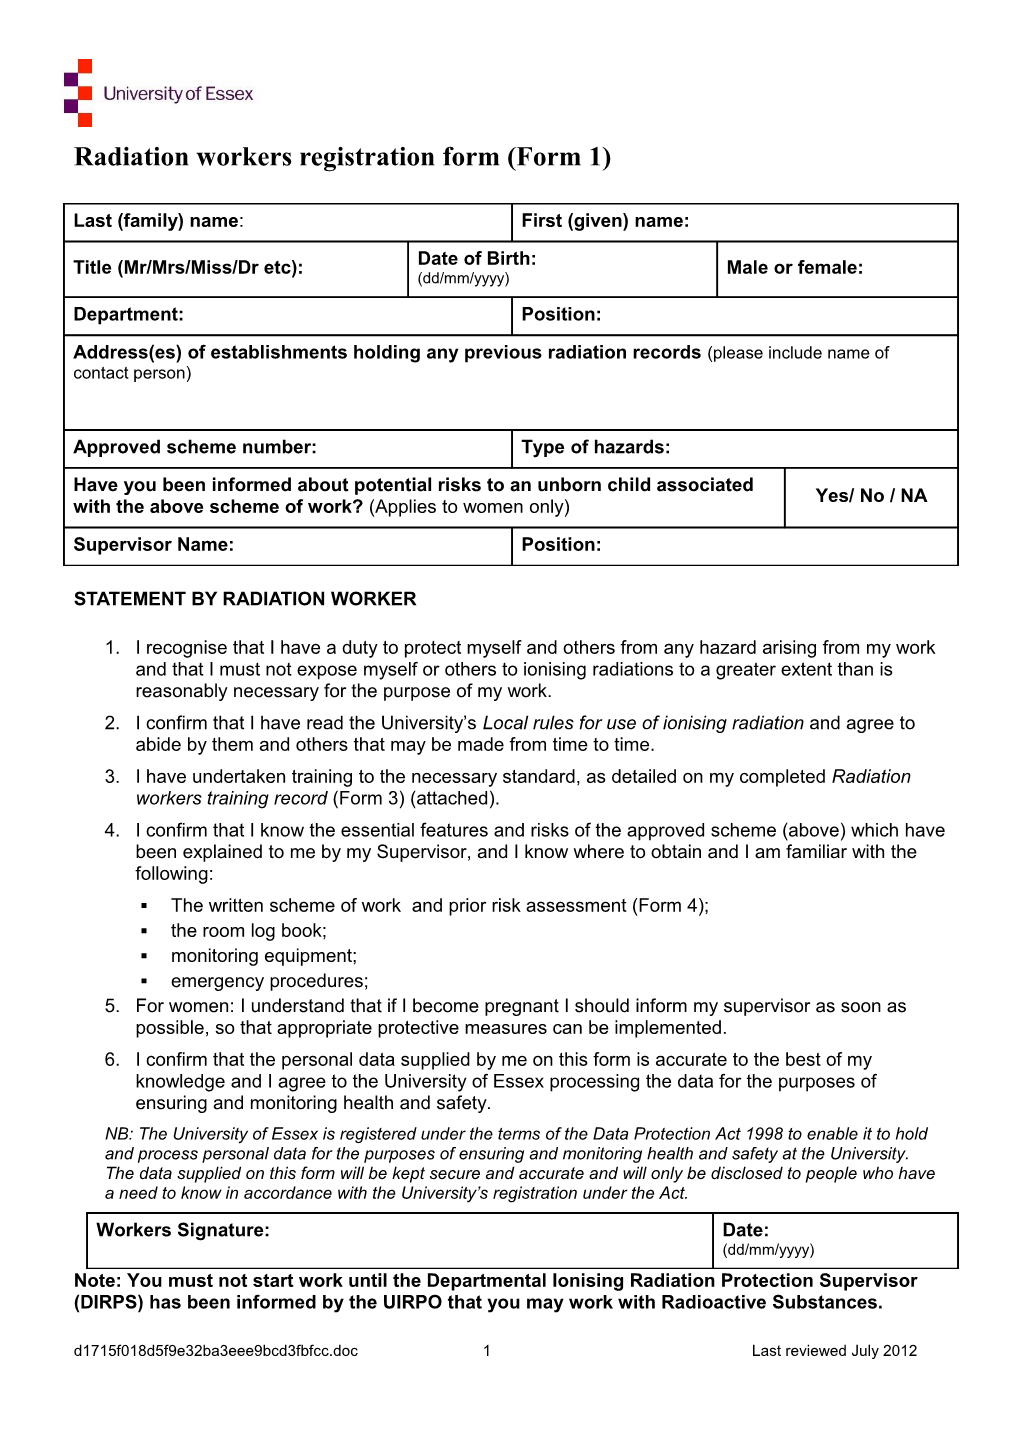 Radiation Workers Reg Form